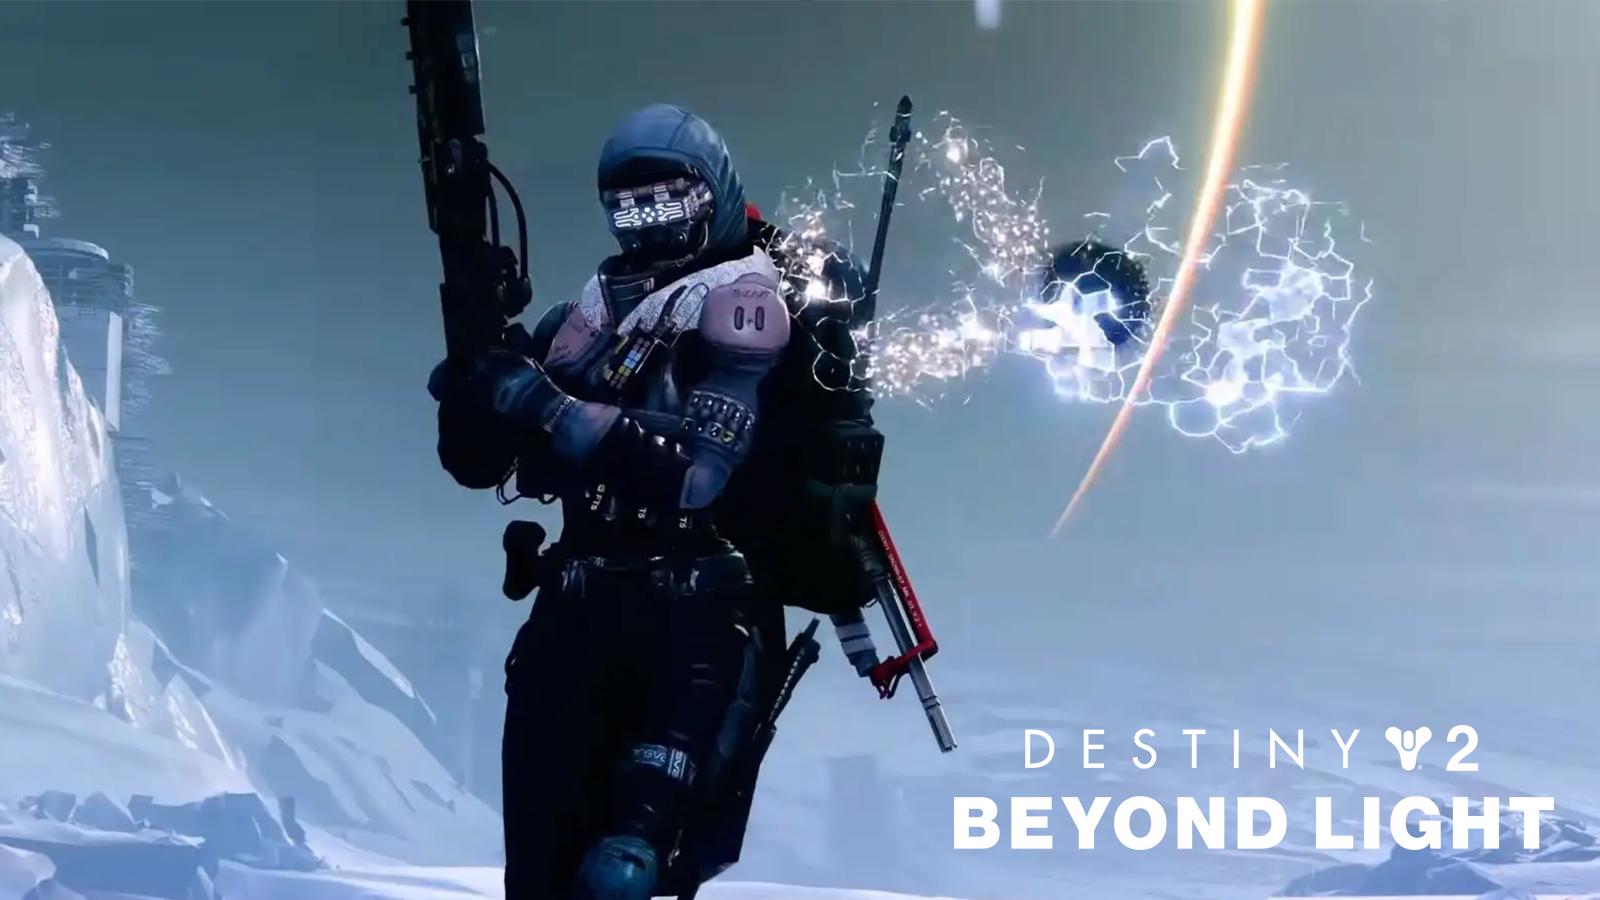 Tips For Getting Started In Destiny 2: Beyond Light